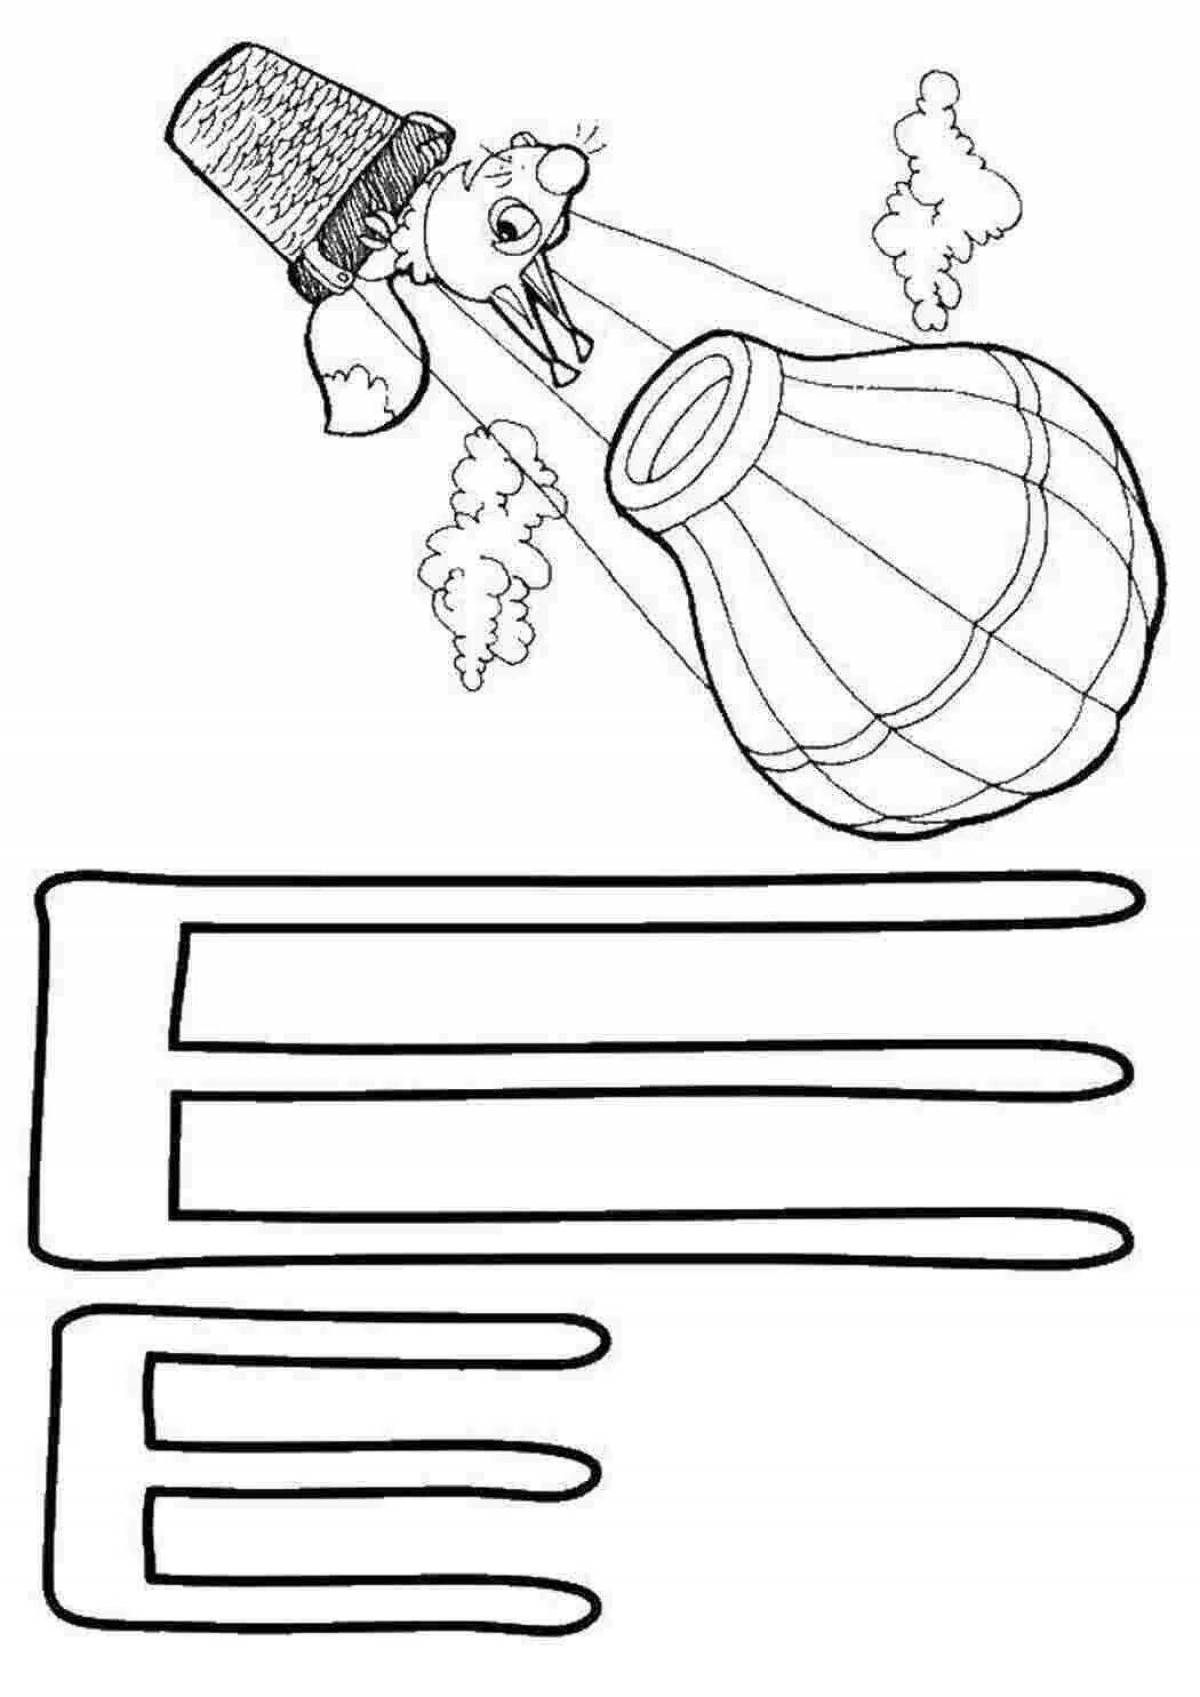 Coloring pages letter w for preschoolers